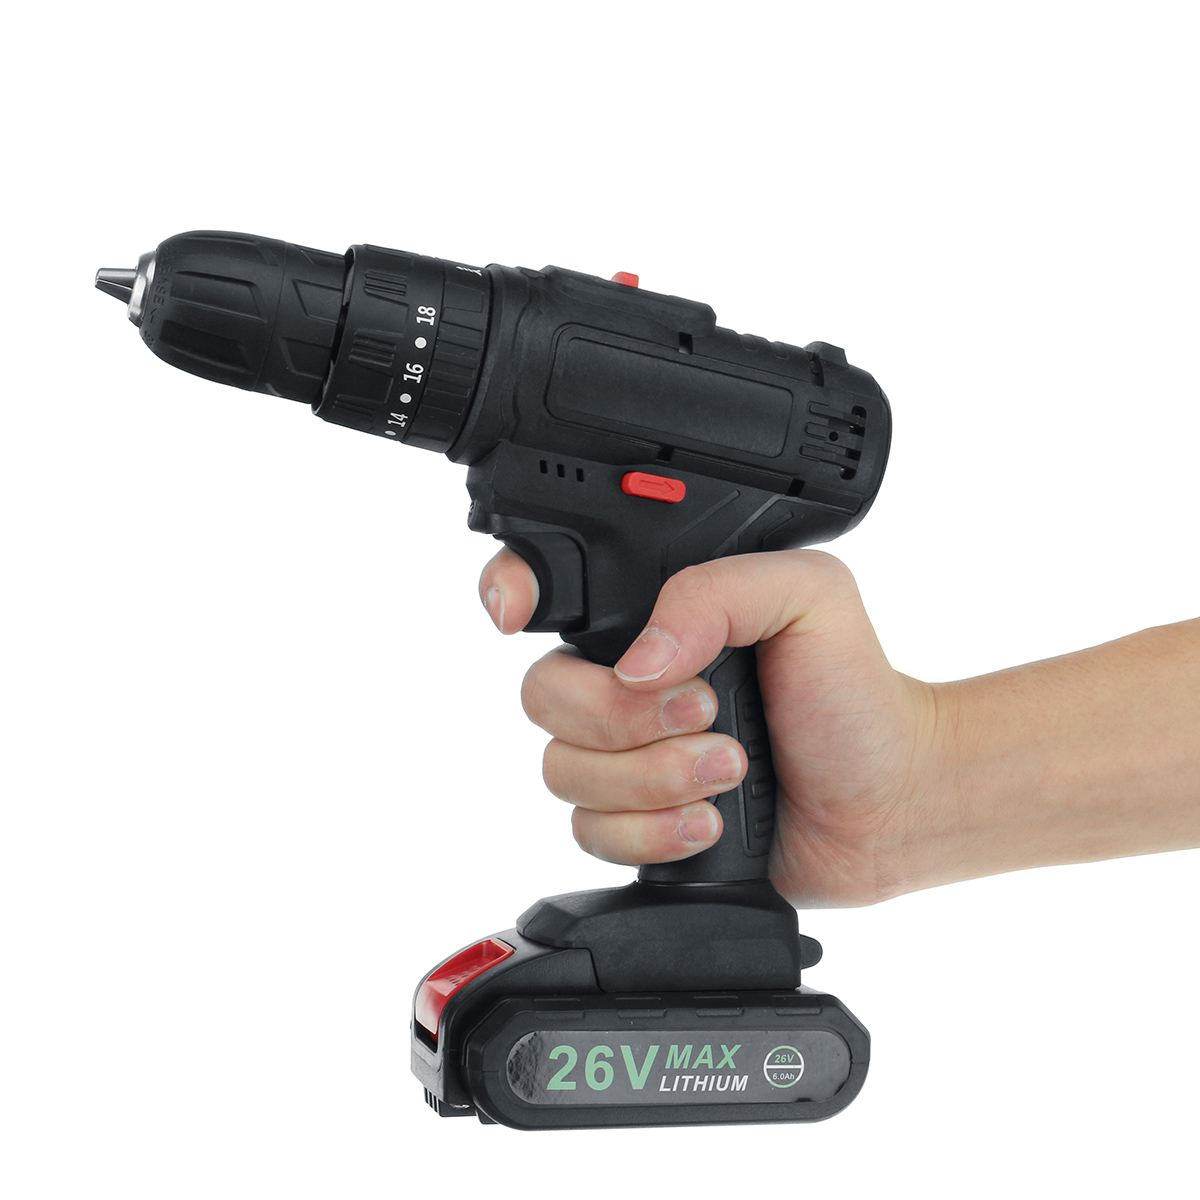 48V-1500W-Impact-Electric-Drill-28Nm-Max-Torque-LED-Light-Screwdriver-Power-W-12pc-Battery-1768847-6